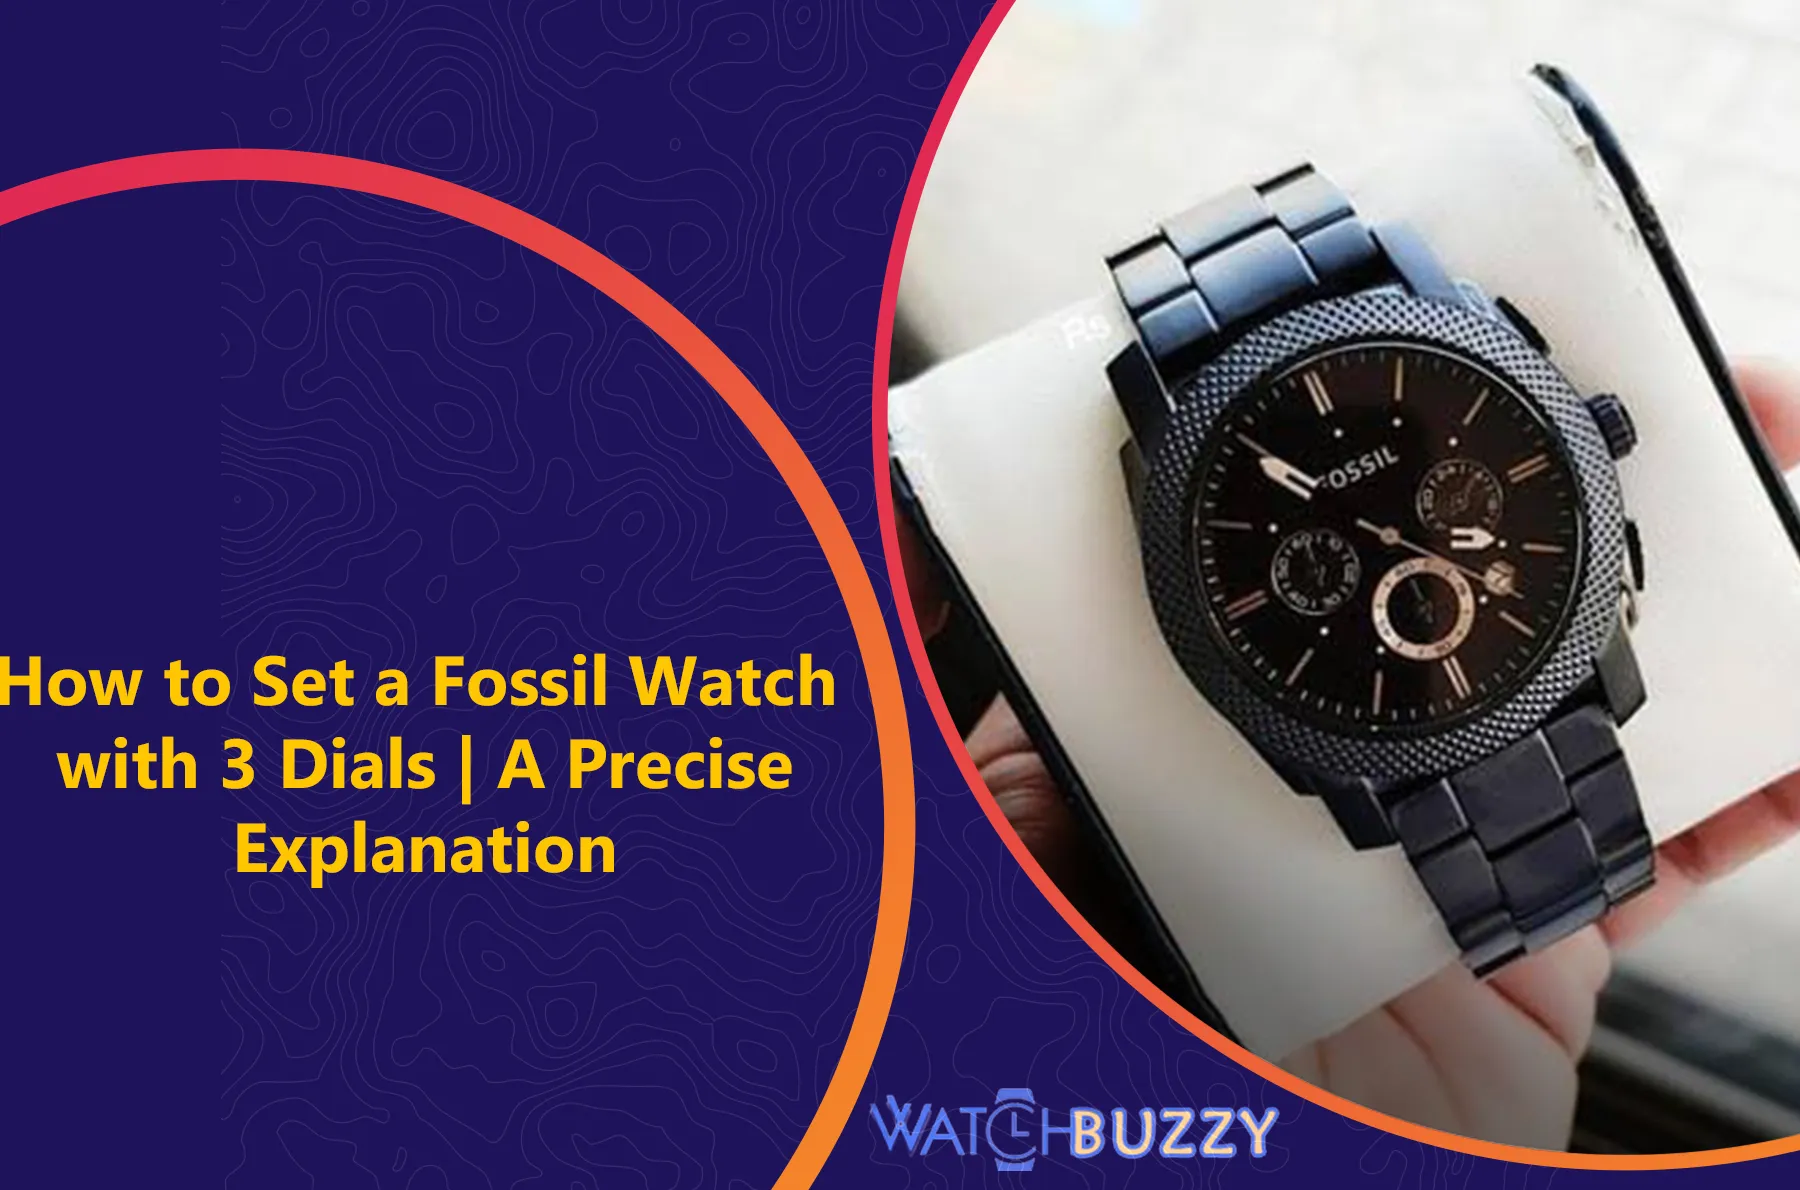 How to Set a Fossil Watch with 3 Dials | A Precise Explanation